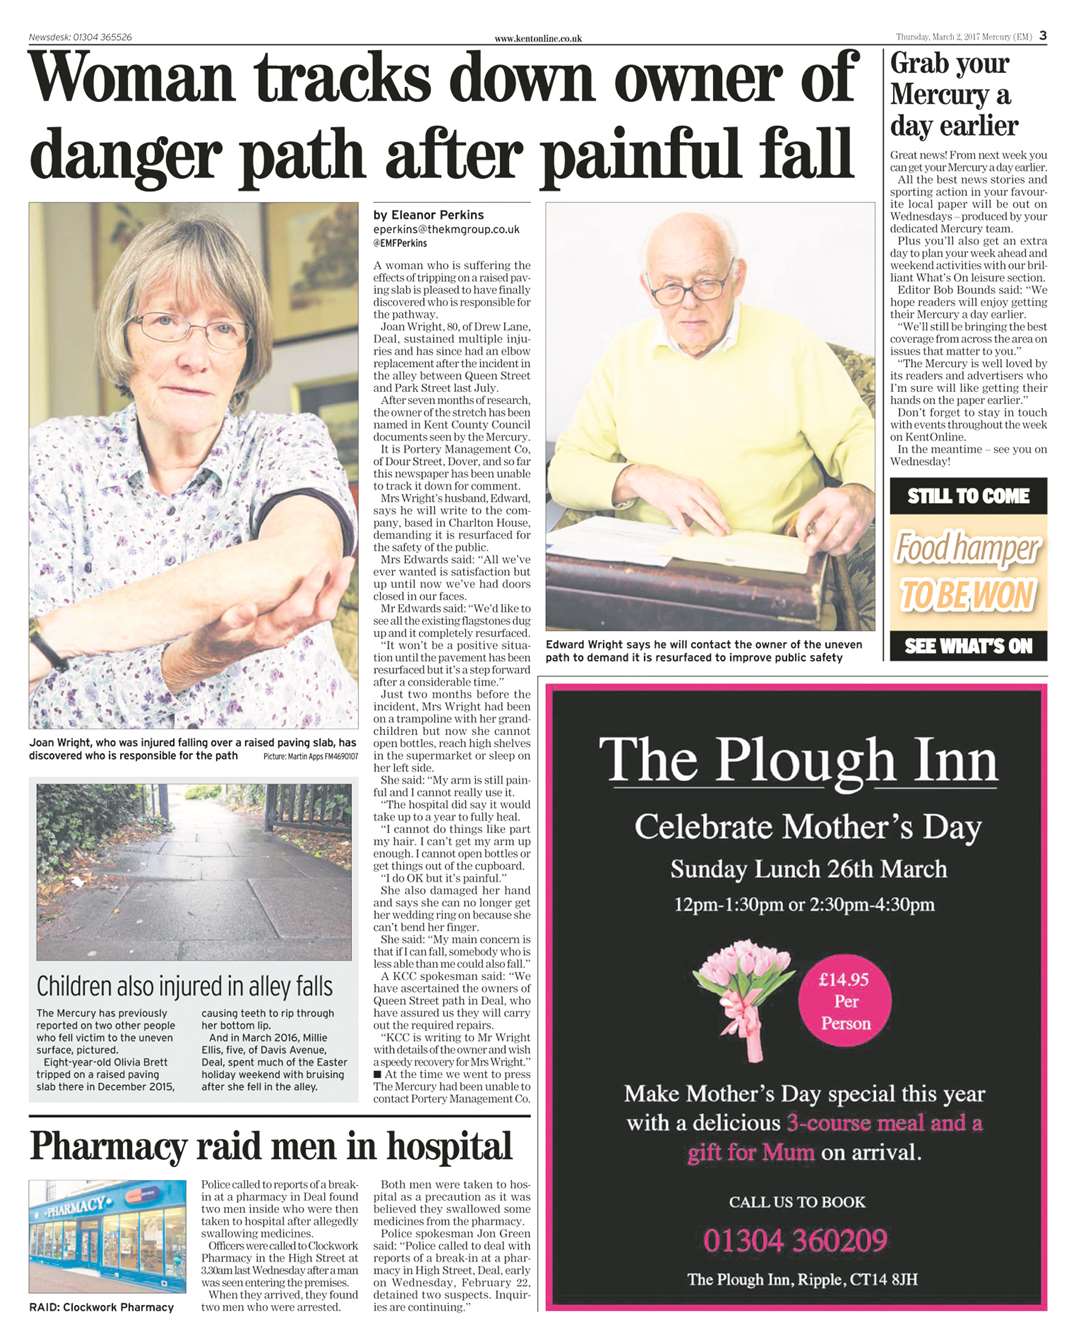 The East Kent Mercury's coverage of accident alley has highlighted the problem